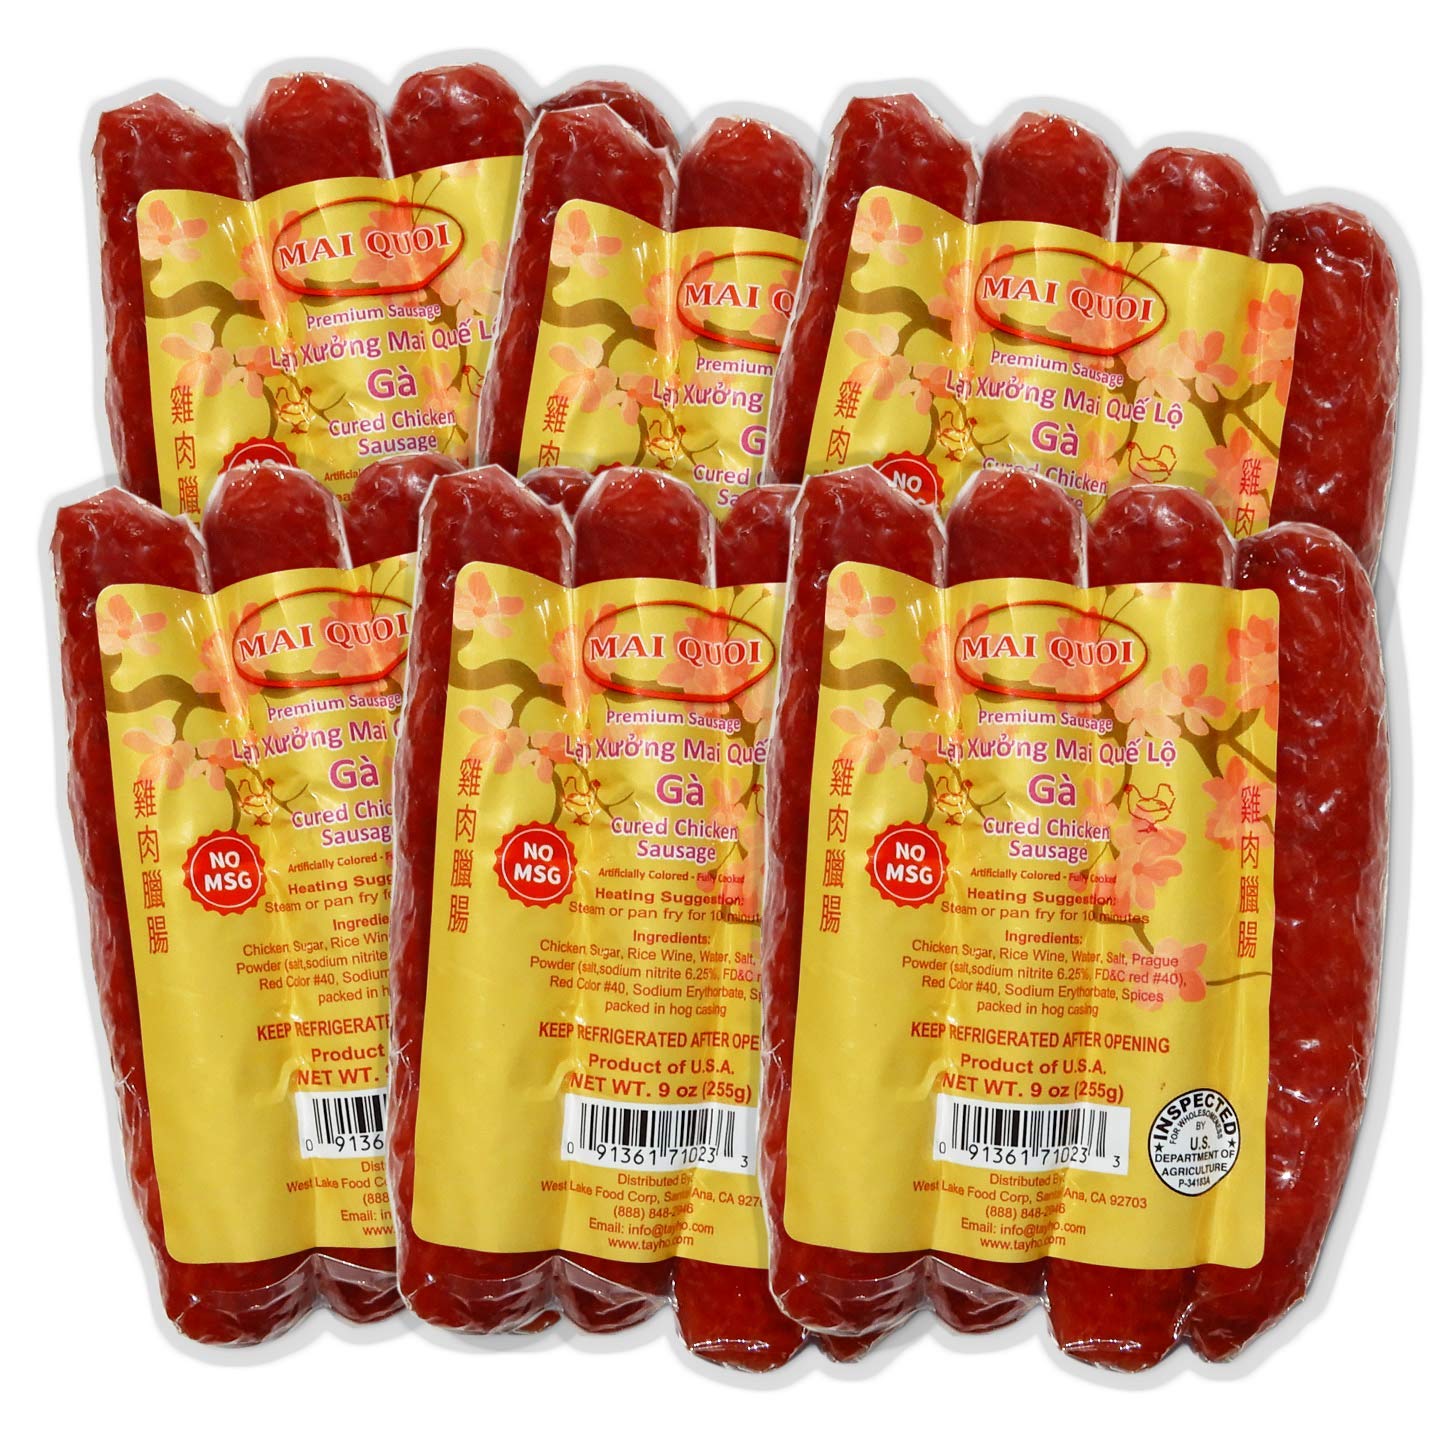 6 packs PREMIUM CHICKEN CURED SAUSAGE LAP XUONG GA (No MSG) Made in the USA